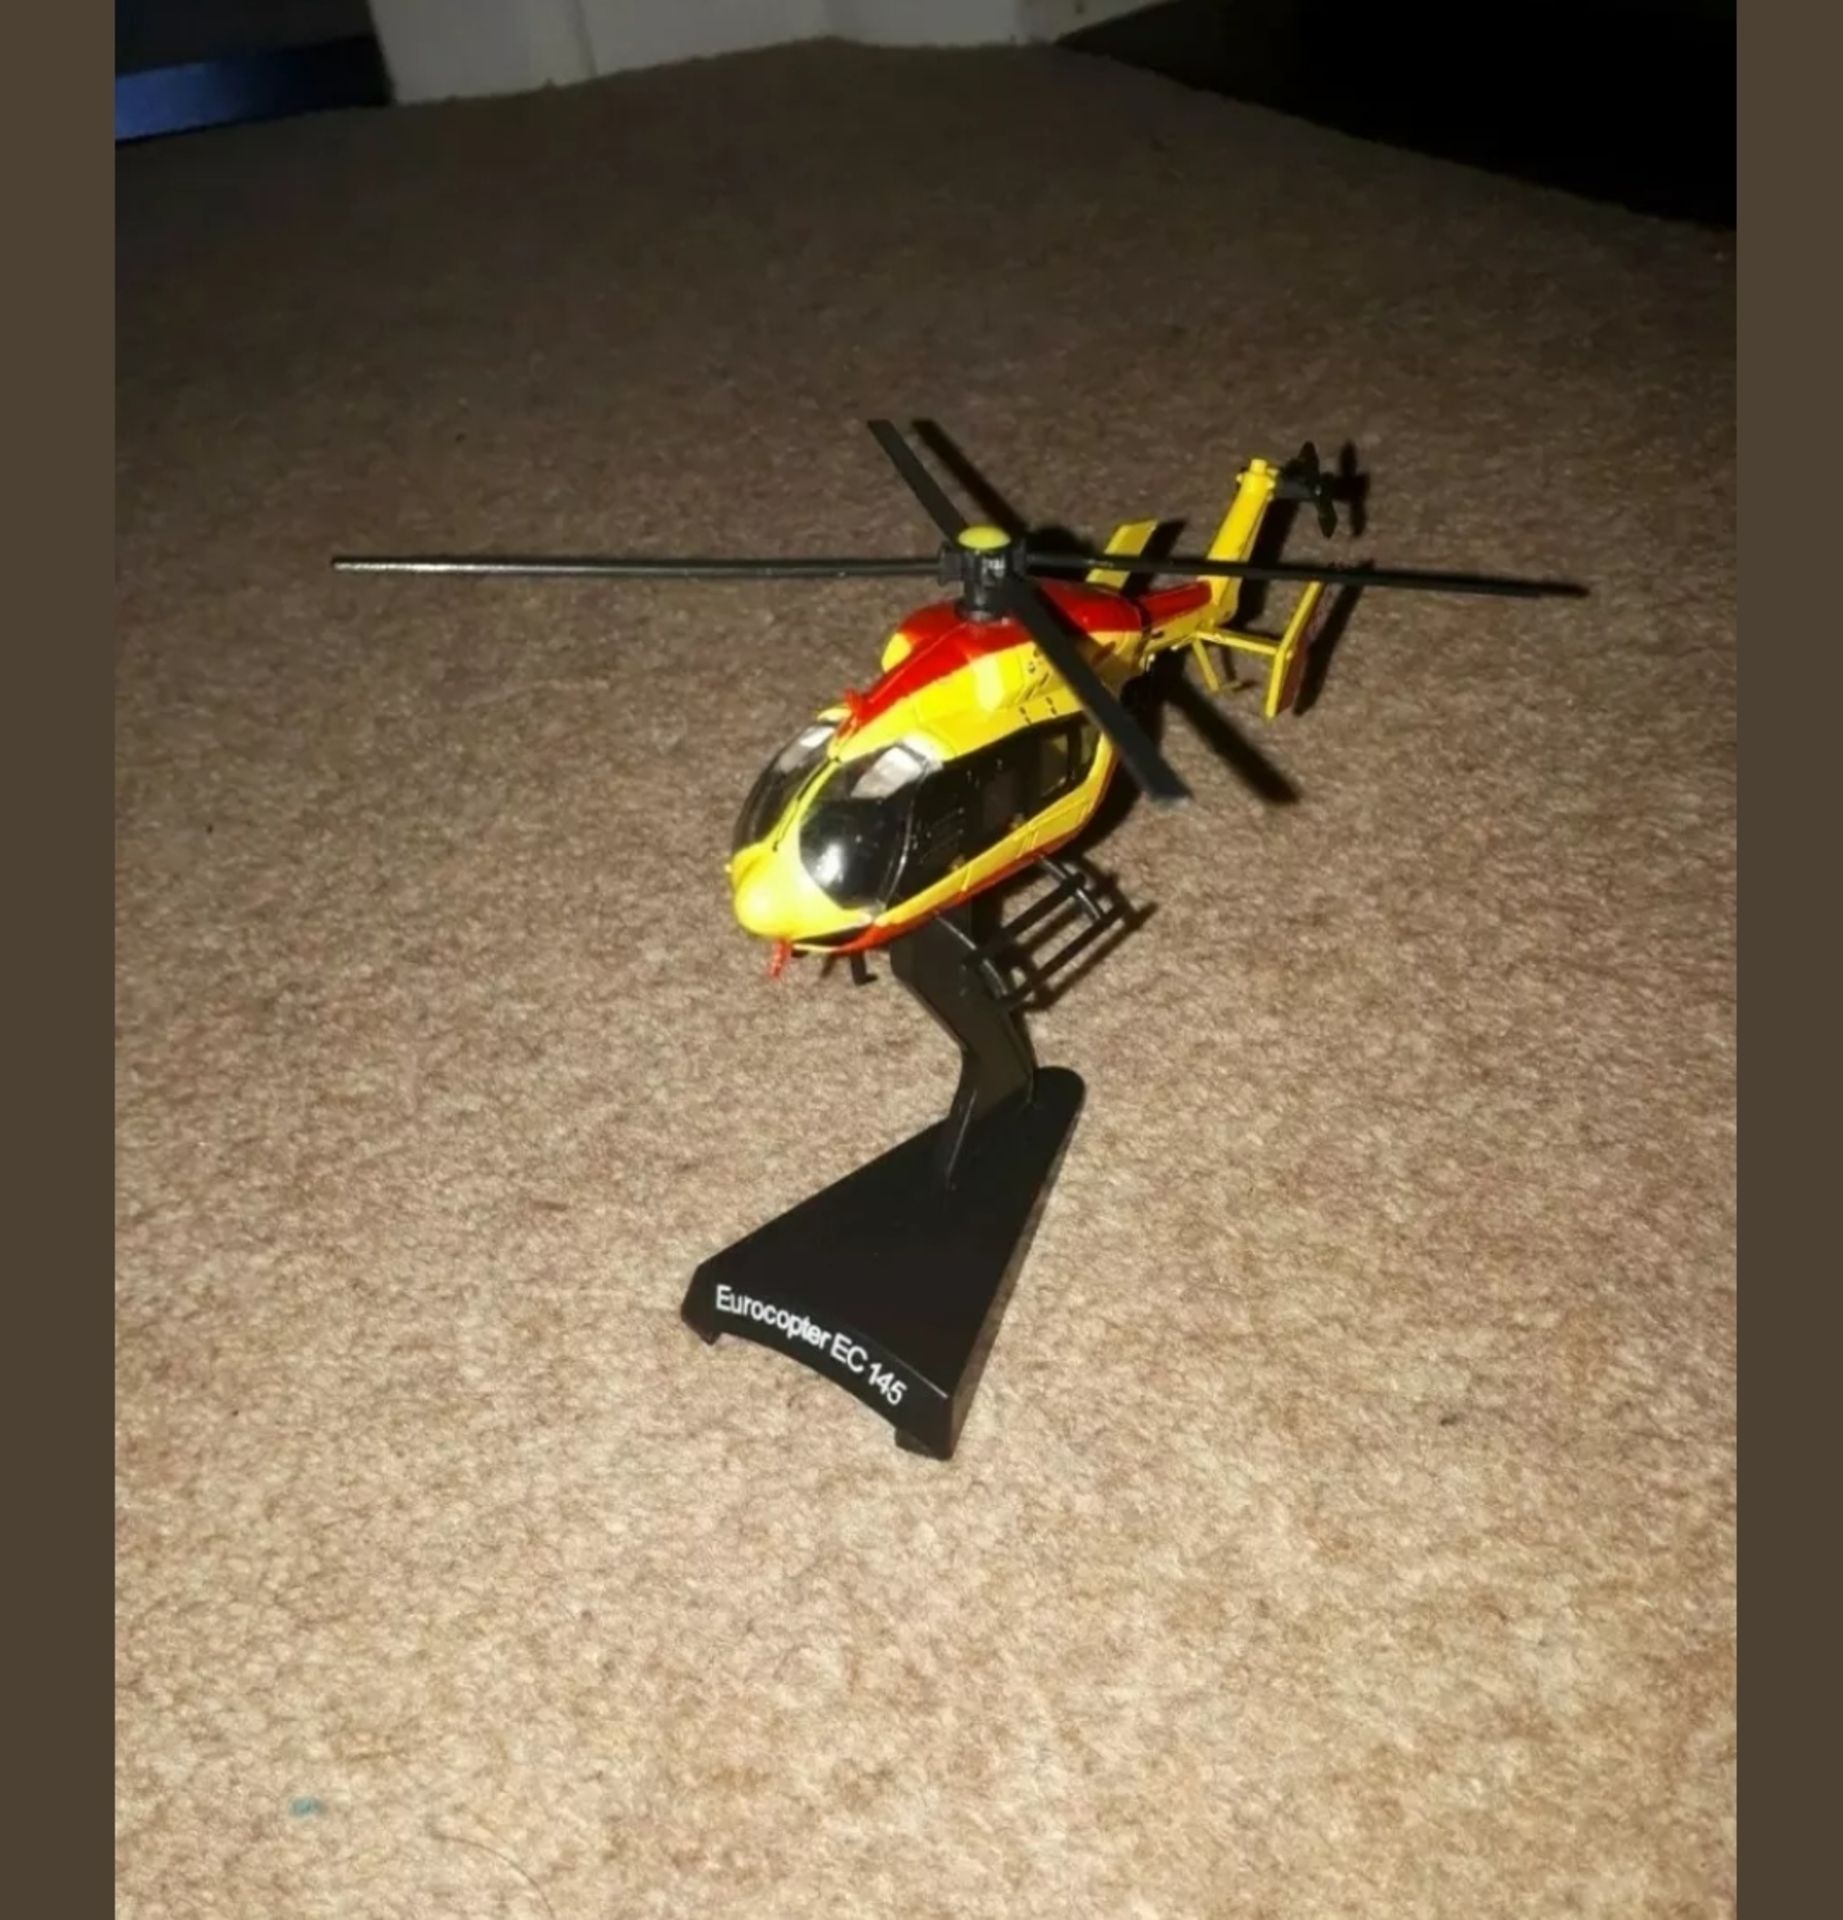 2x Model helicopters